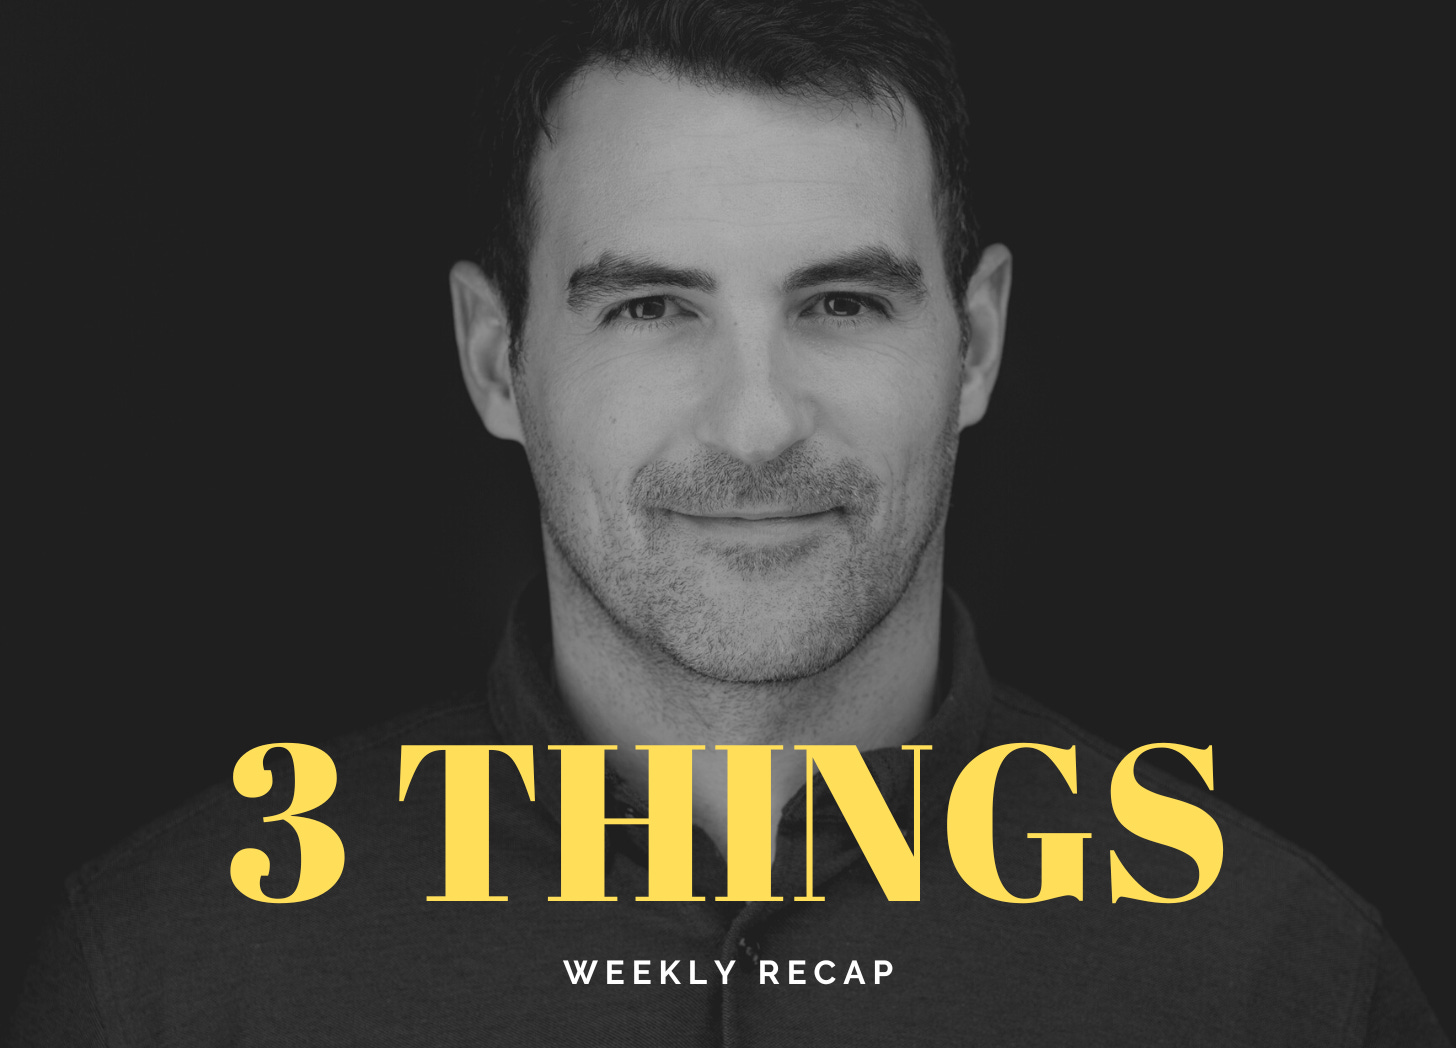 Three Things - Weekly Link Round Up by Andrew Kooman